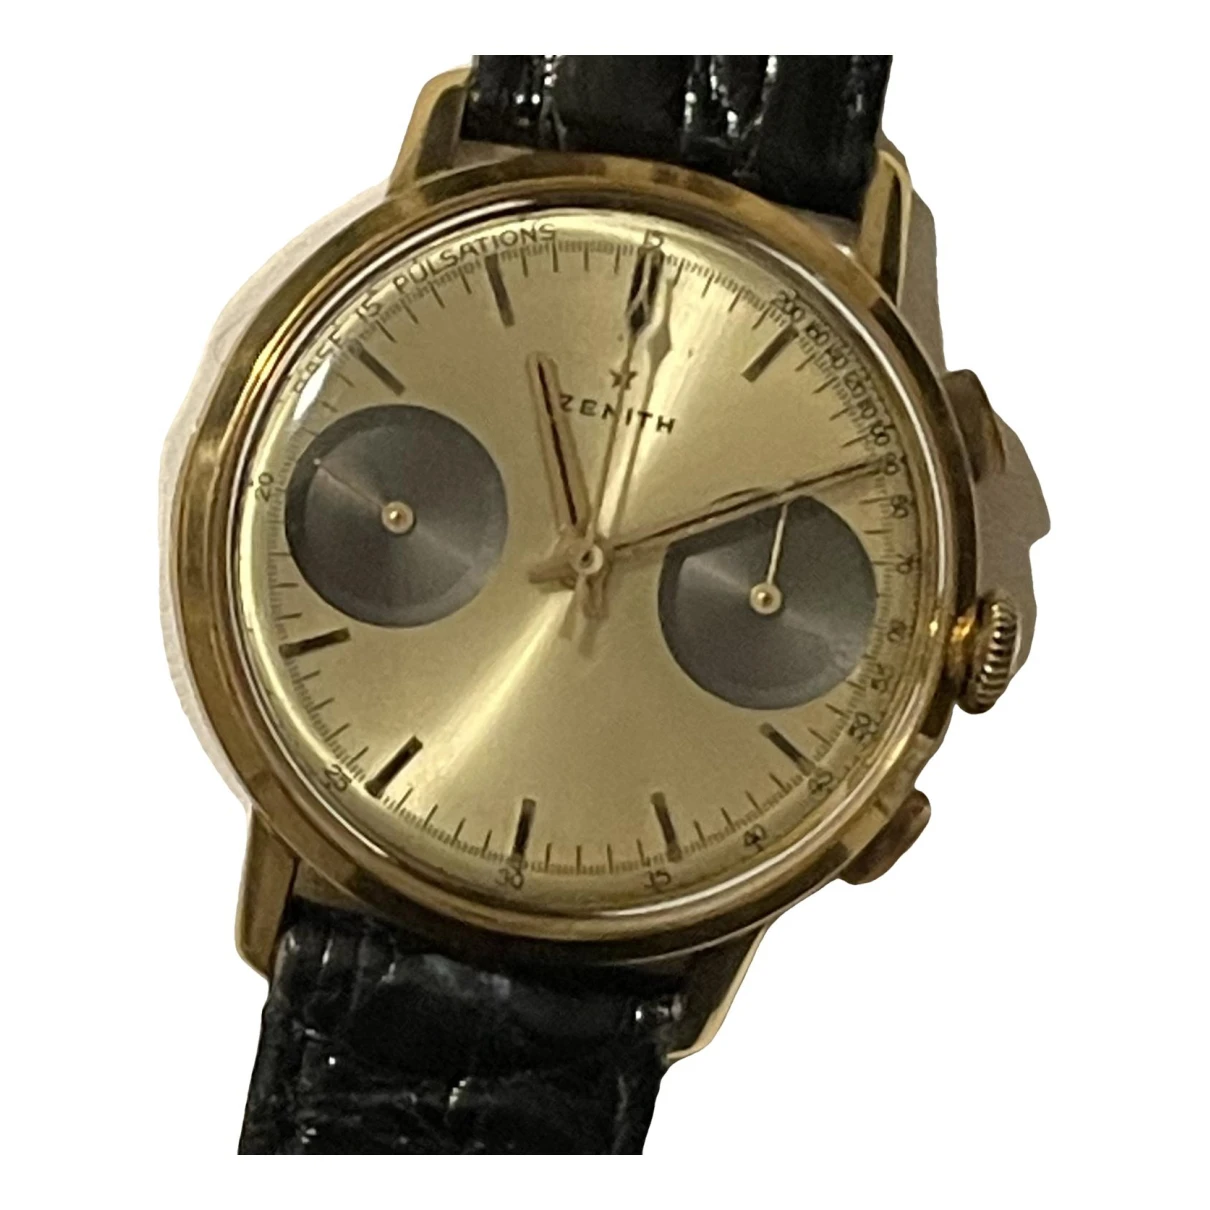 Pre-owned Zenith Gold Watch